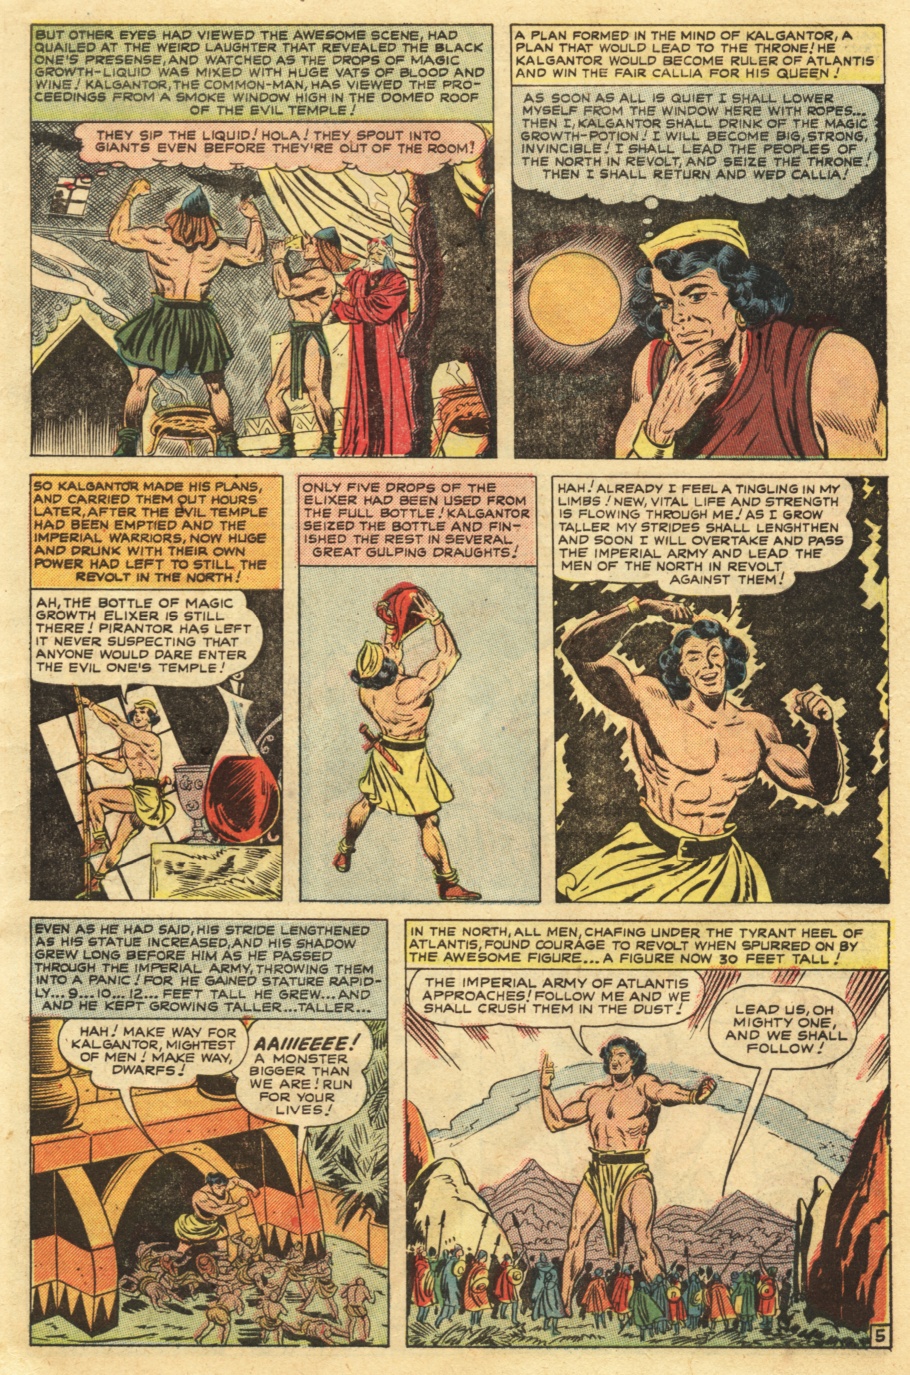 Marvel Tales (1949) 97 Page 6